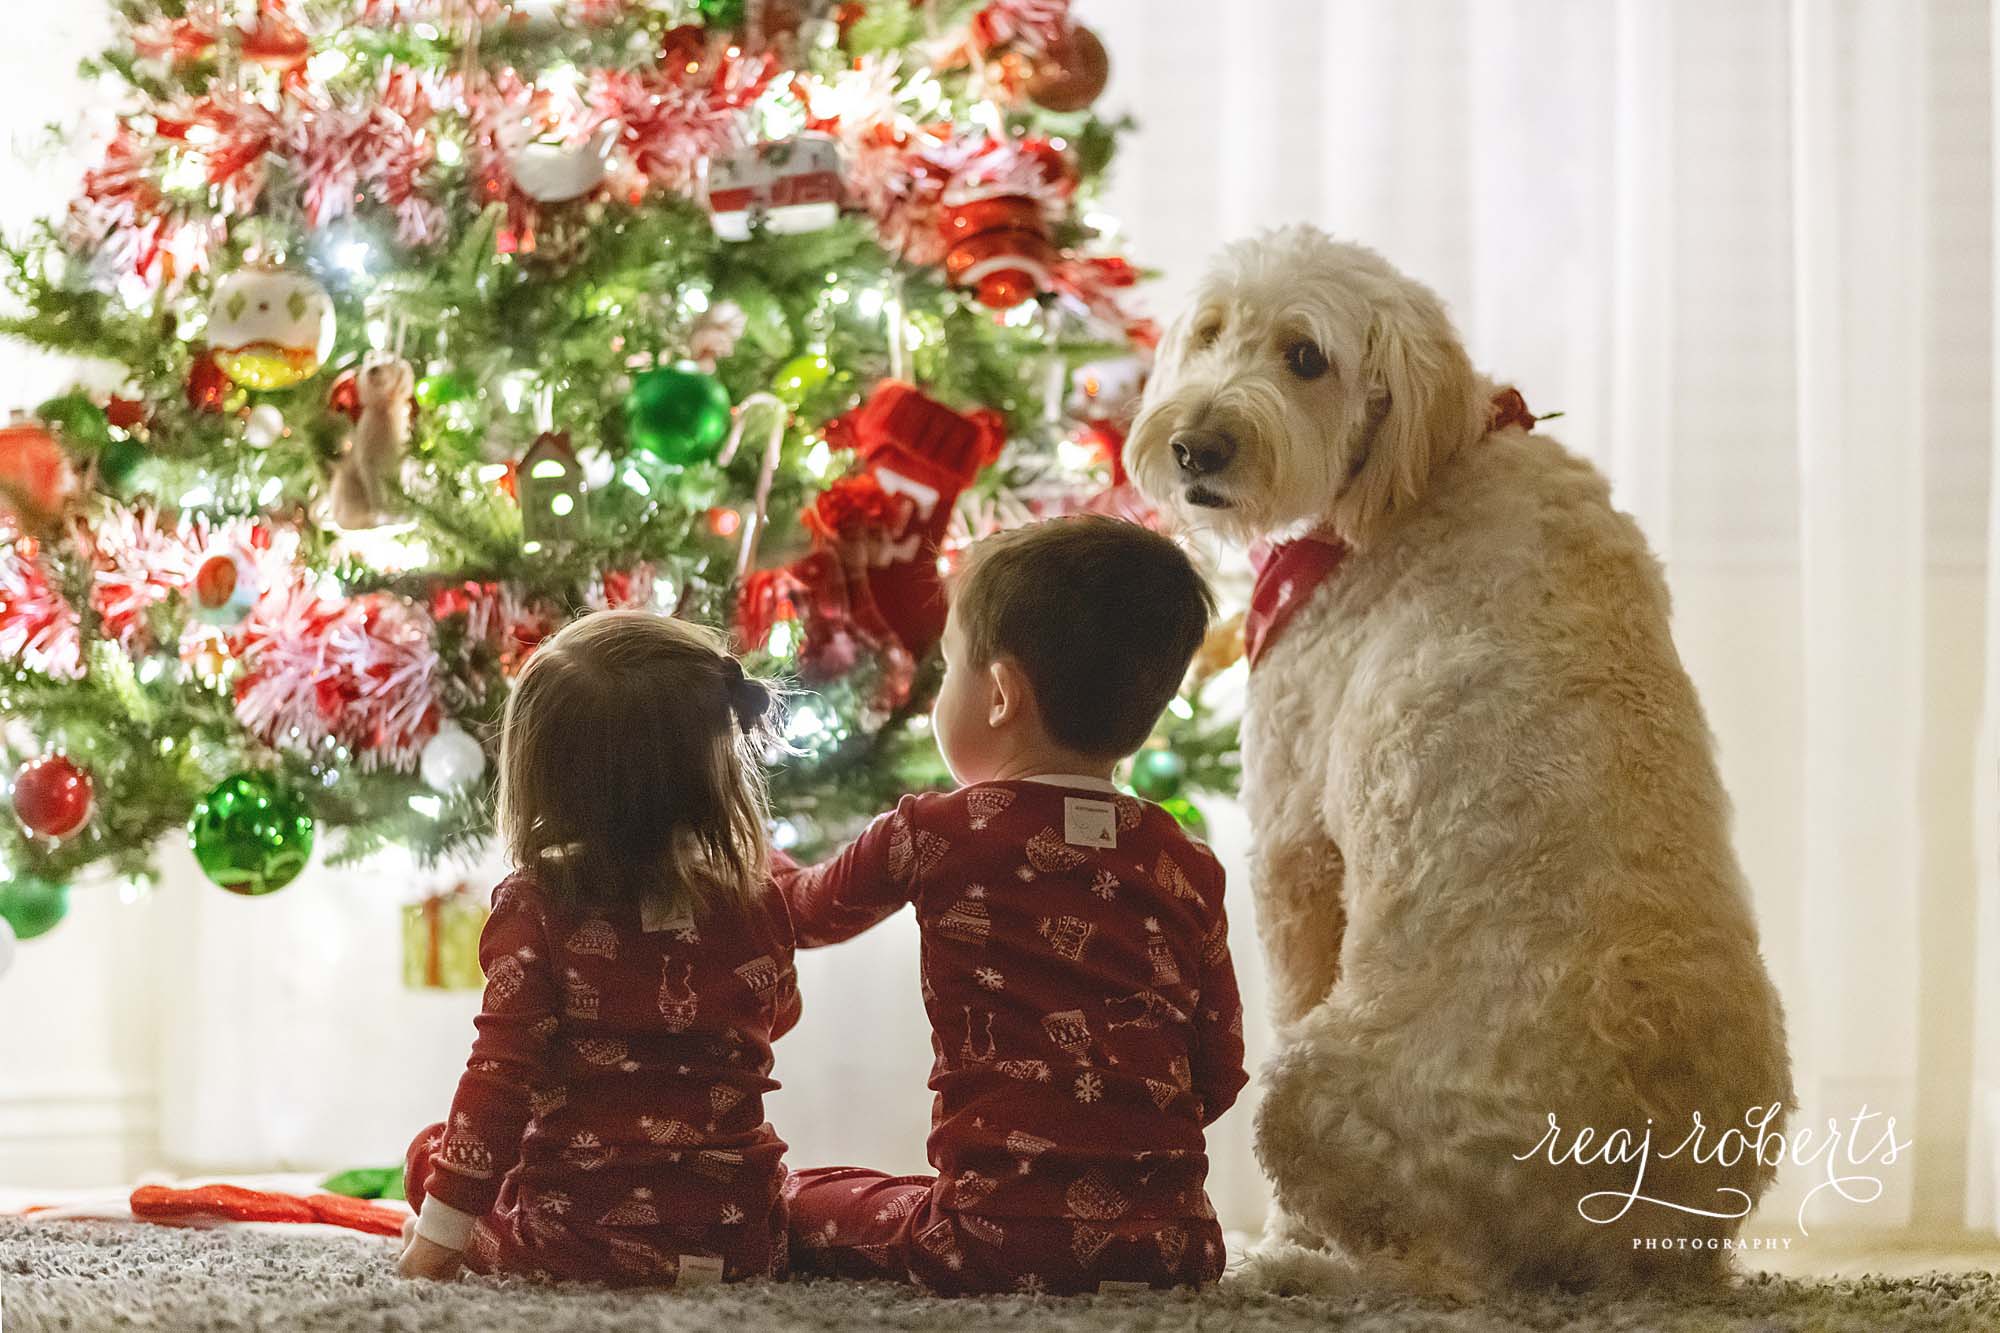 Christmas tree photos with toddlers and dog Christmas tree photos | Simply Sparkle Sessions by Reaj Roberts Photography